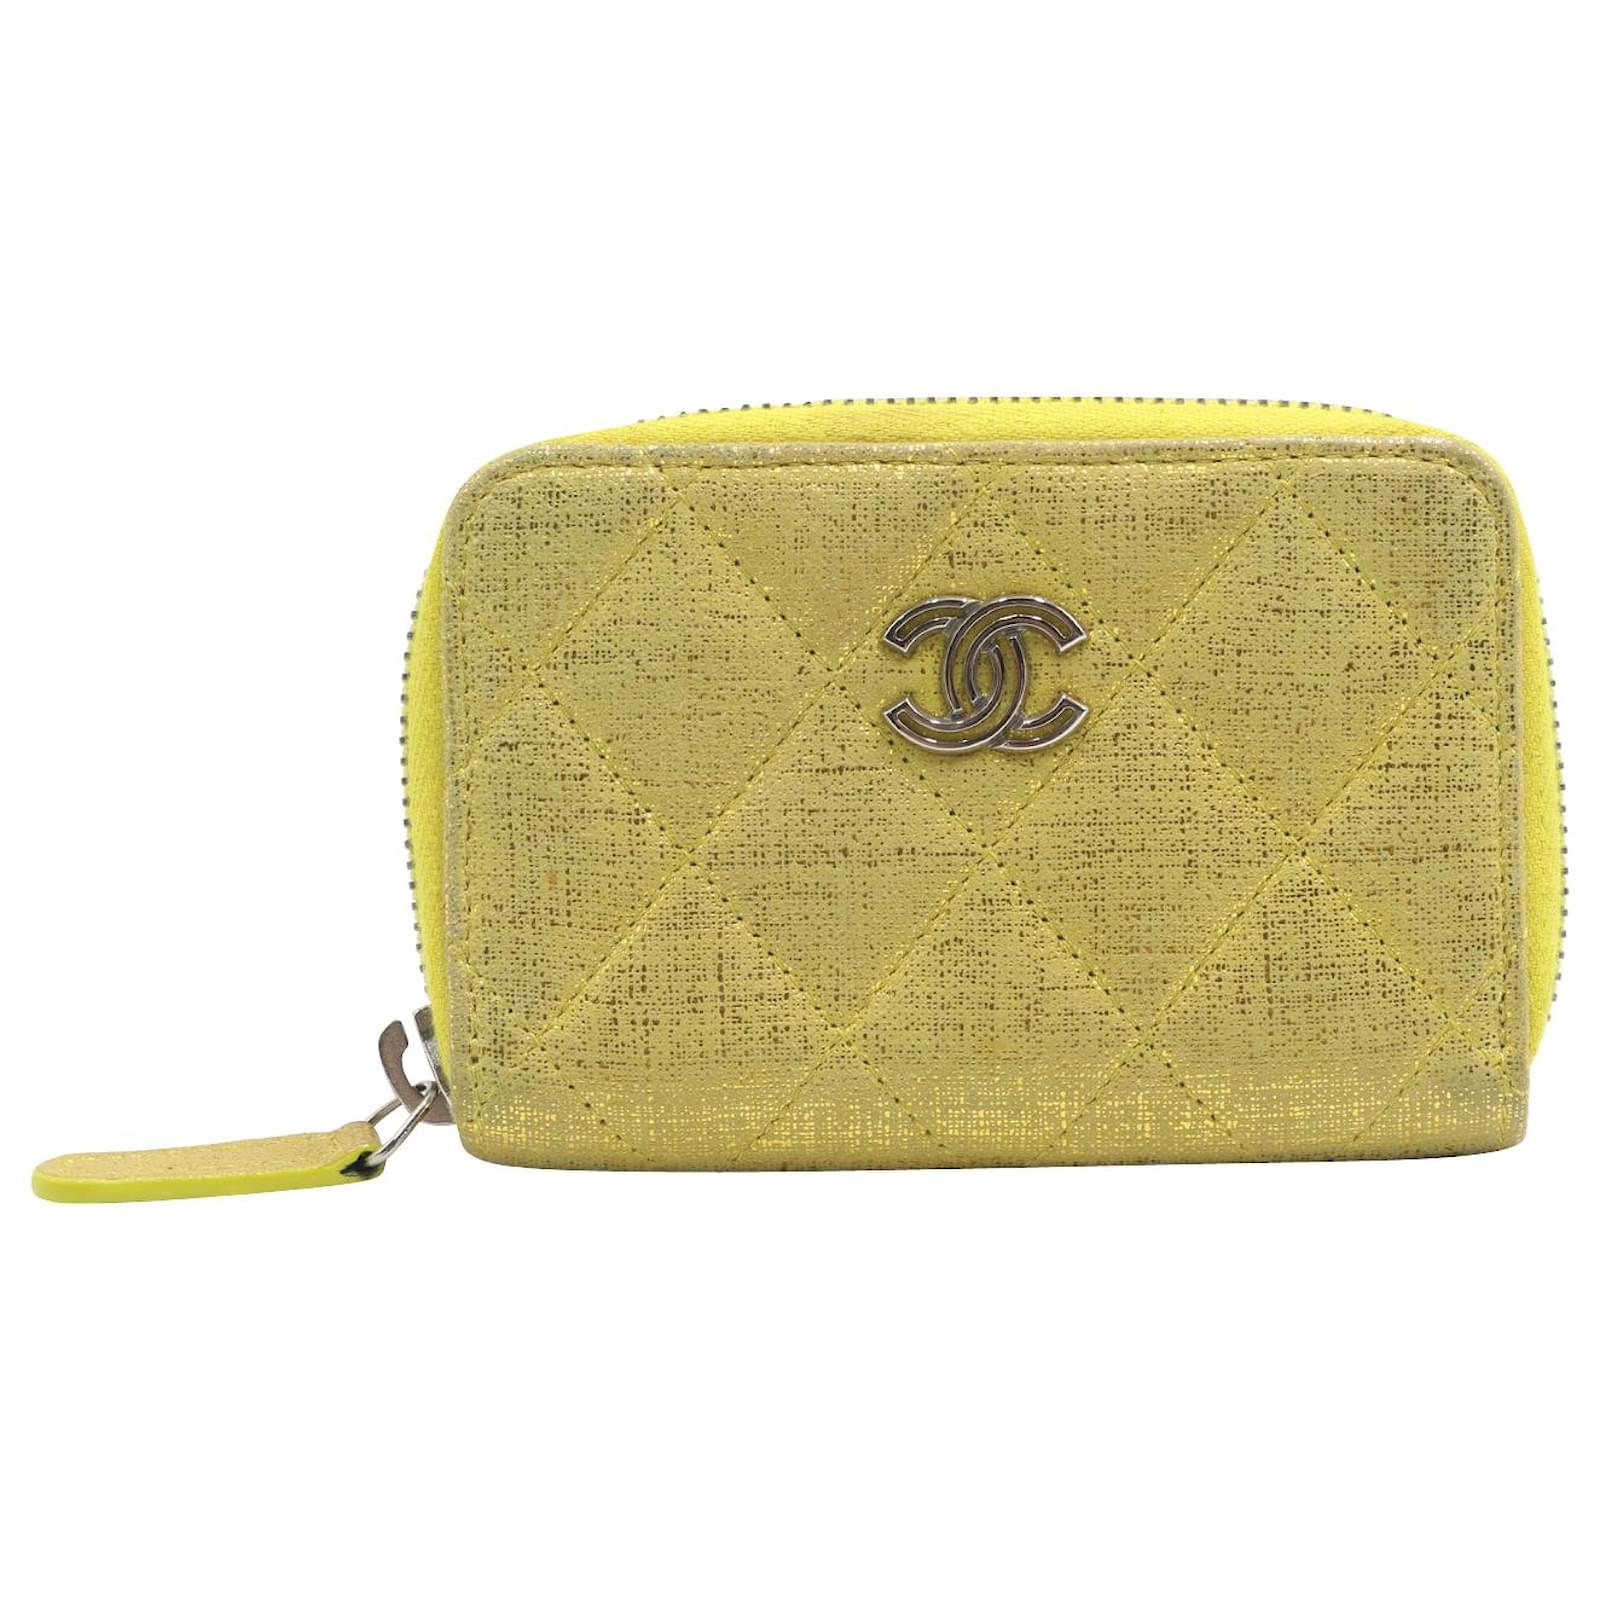 CHANEL Caviar Quilted Zip Around Classic Coin Purse Yellow 646236